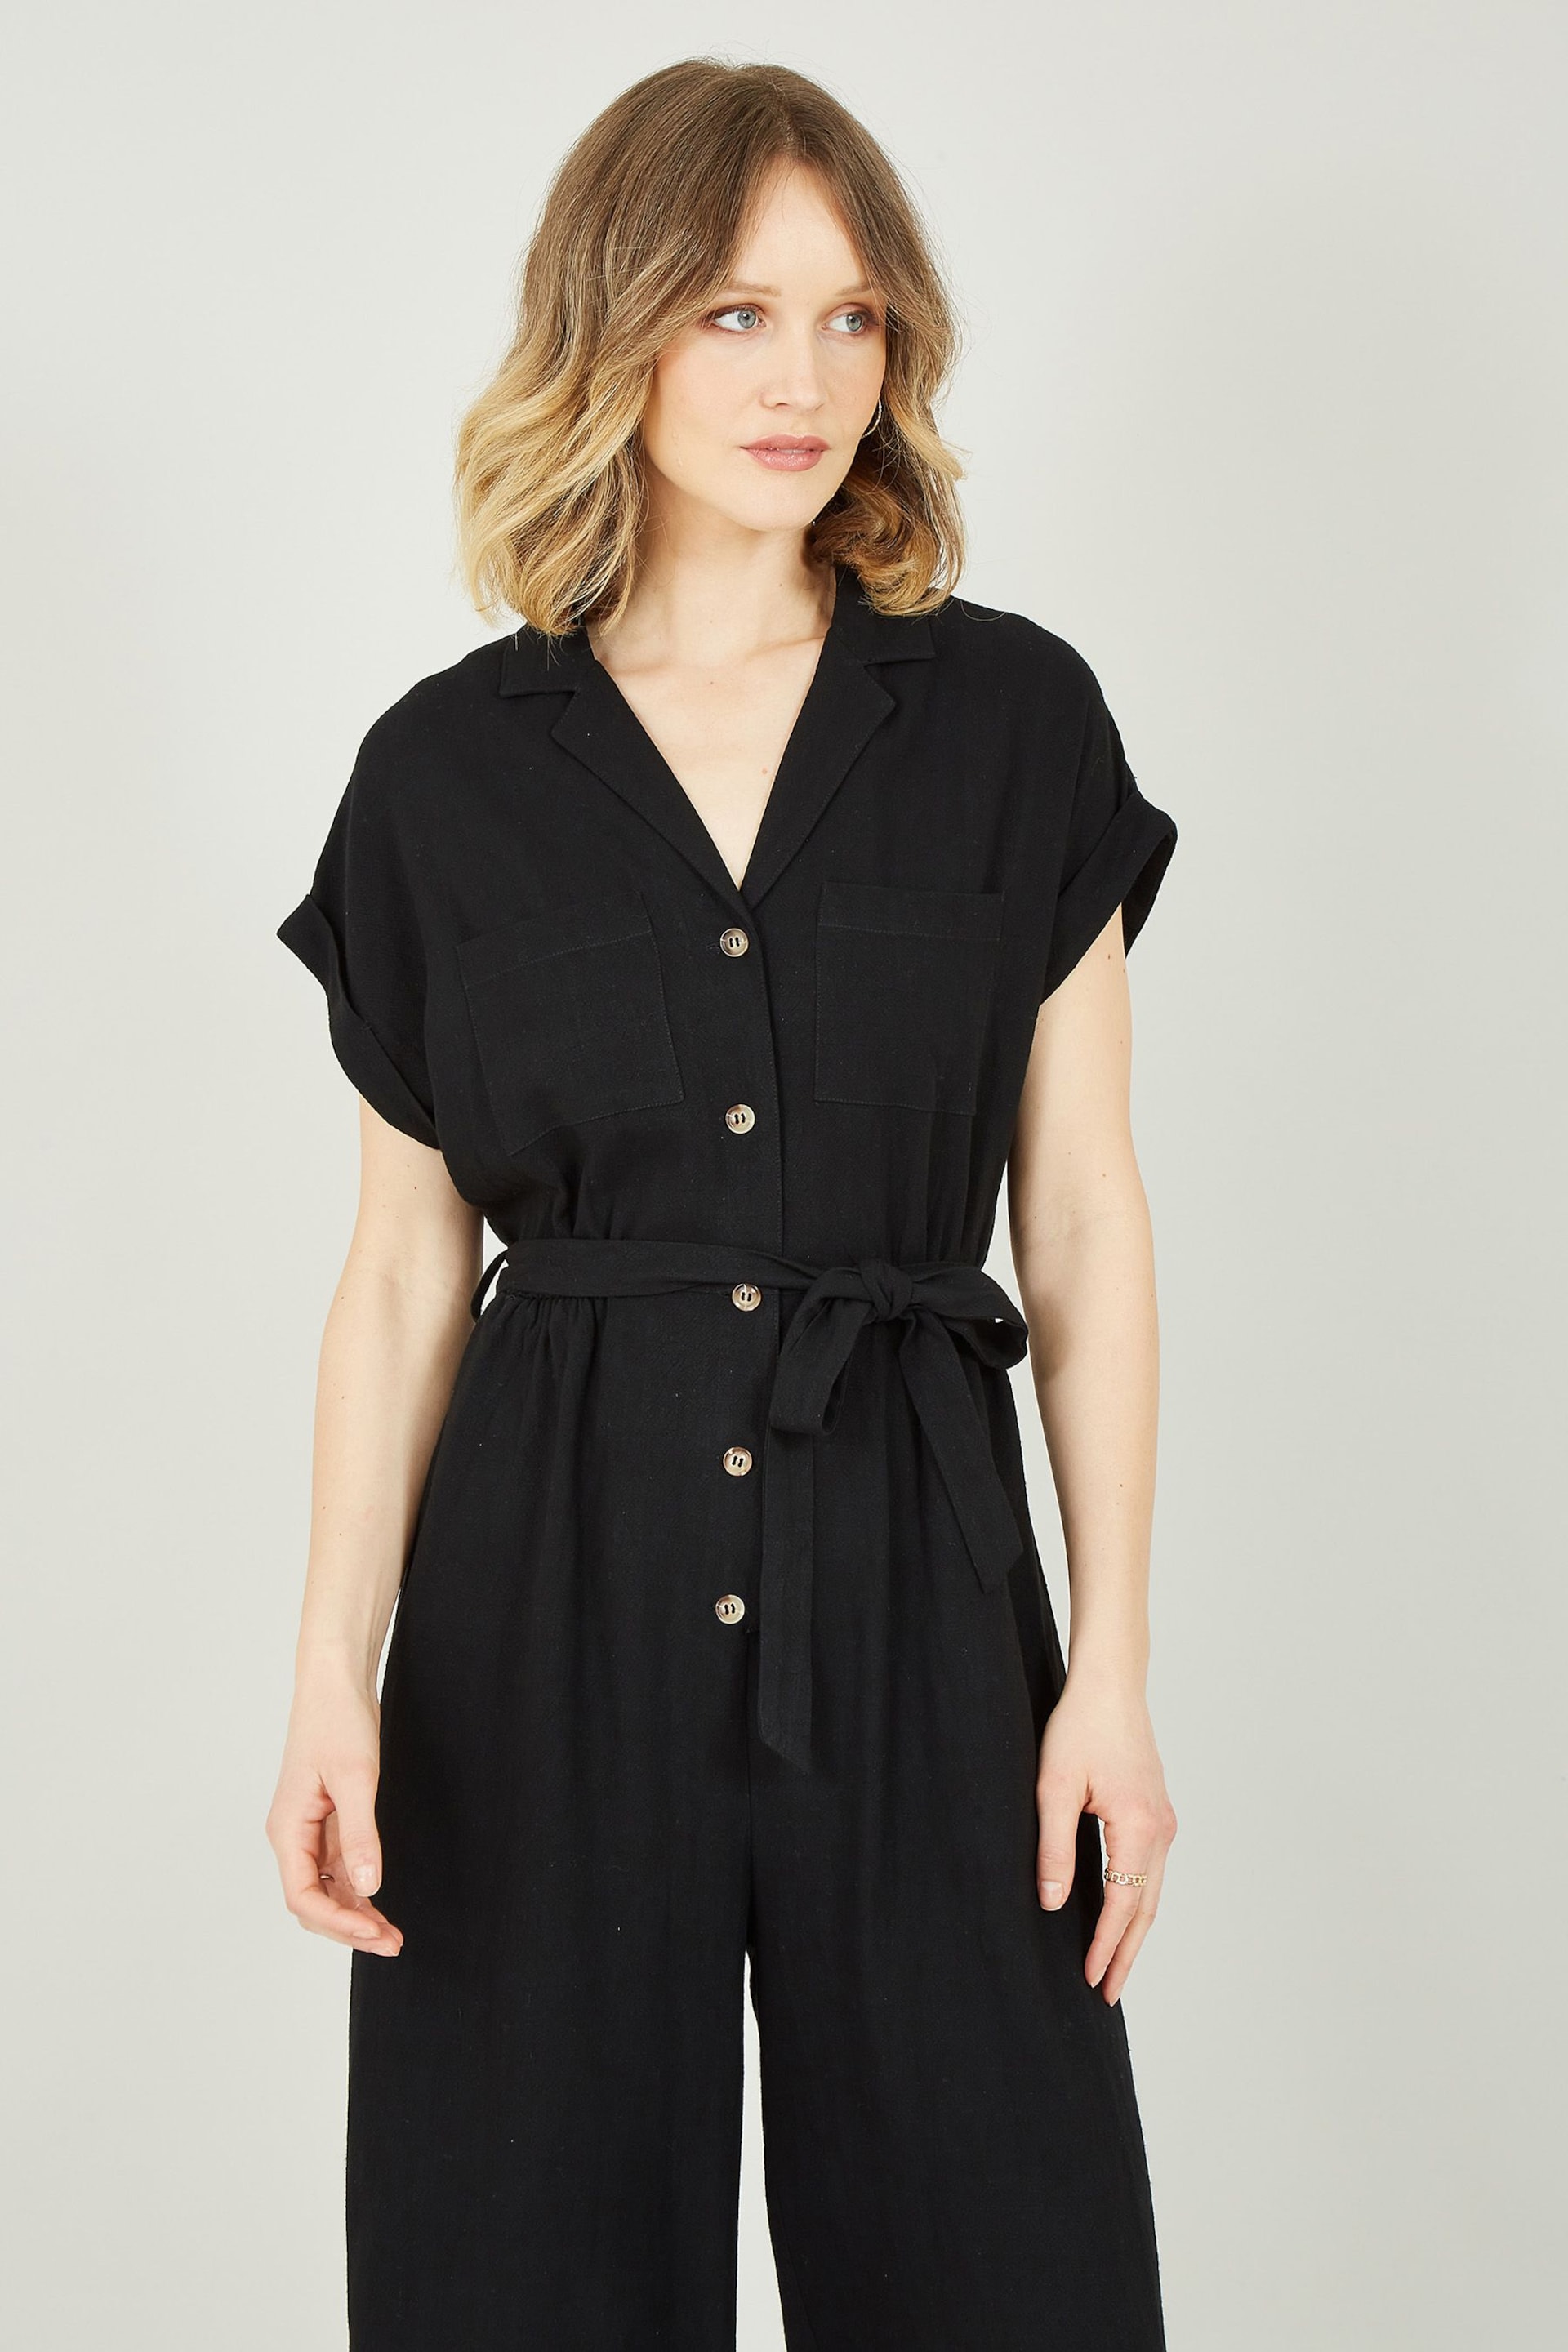 Yumi Black Button up Jumpsuit - Image 2 of 5